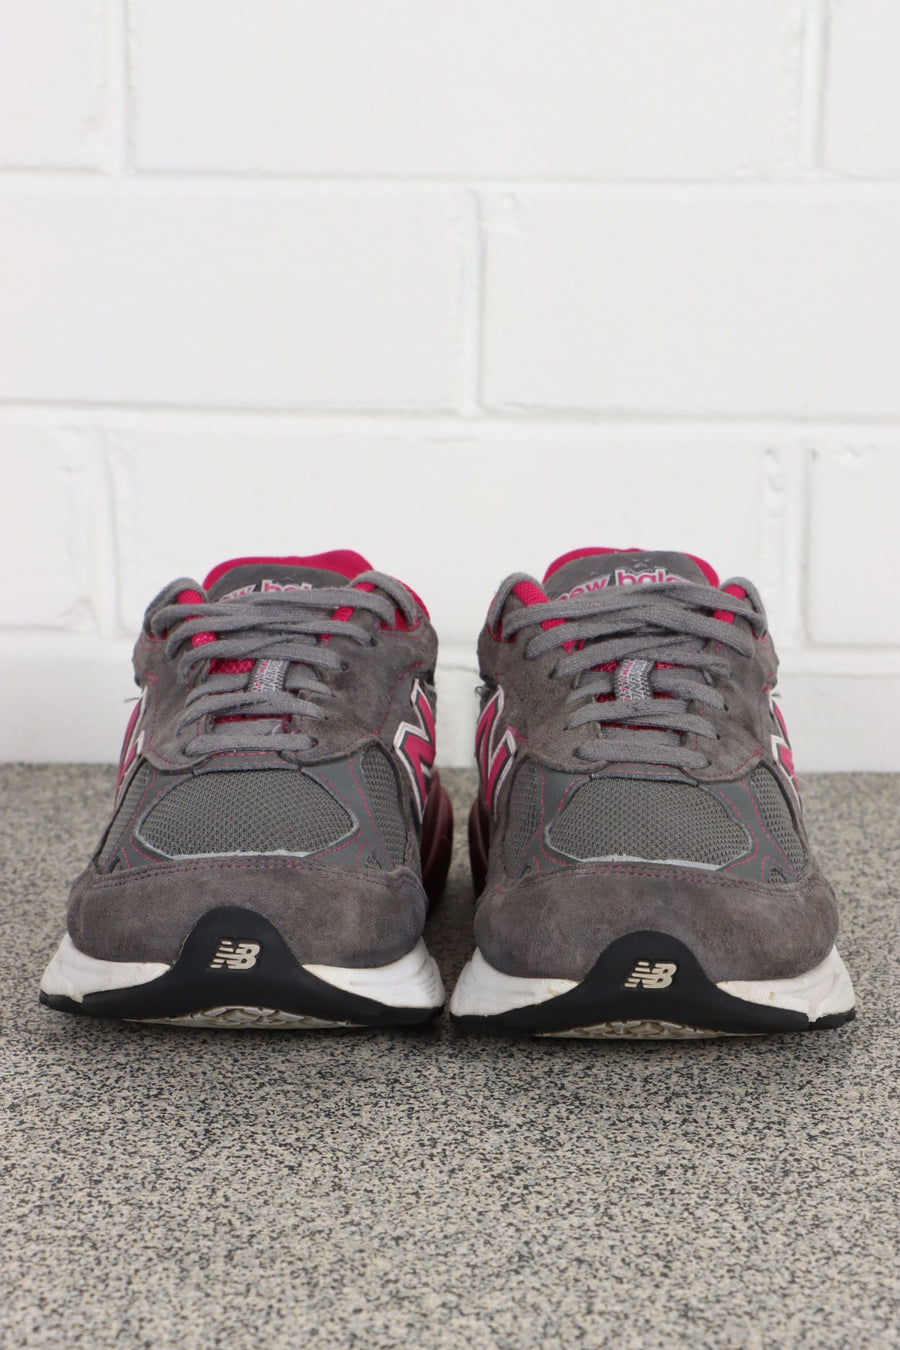 NEW BALANCE 990 Breast Cancer Awareness Grey Pink Sneakers (8.5)